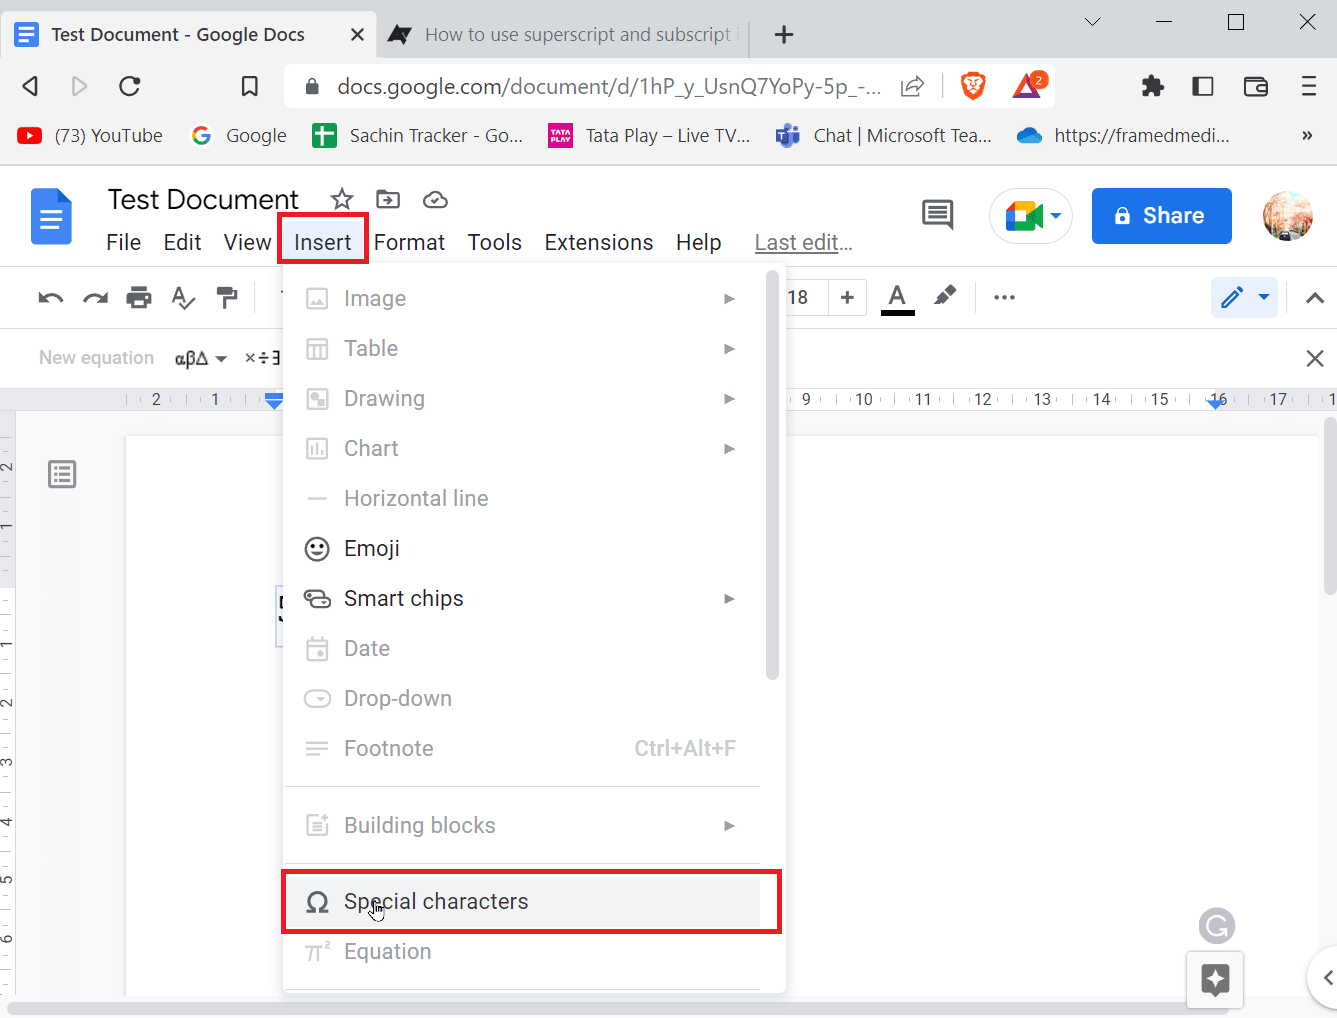 Go to Insert and click on Special characters. How to Add Arrows, Superscript and Symbols in Google Docs